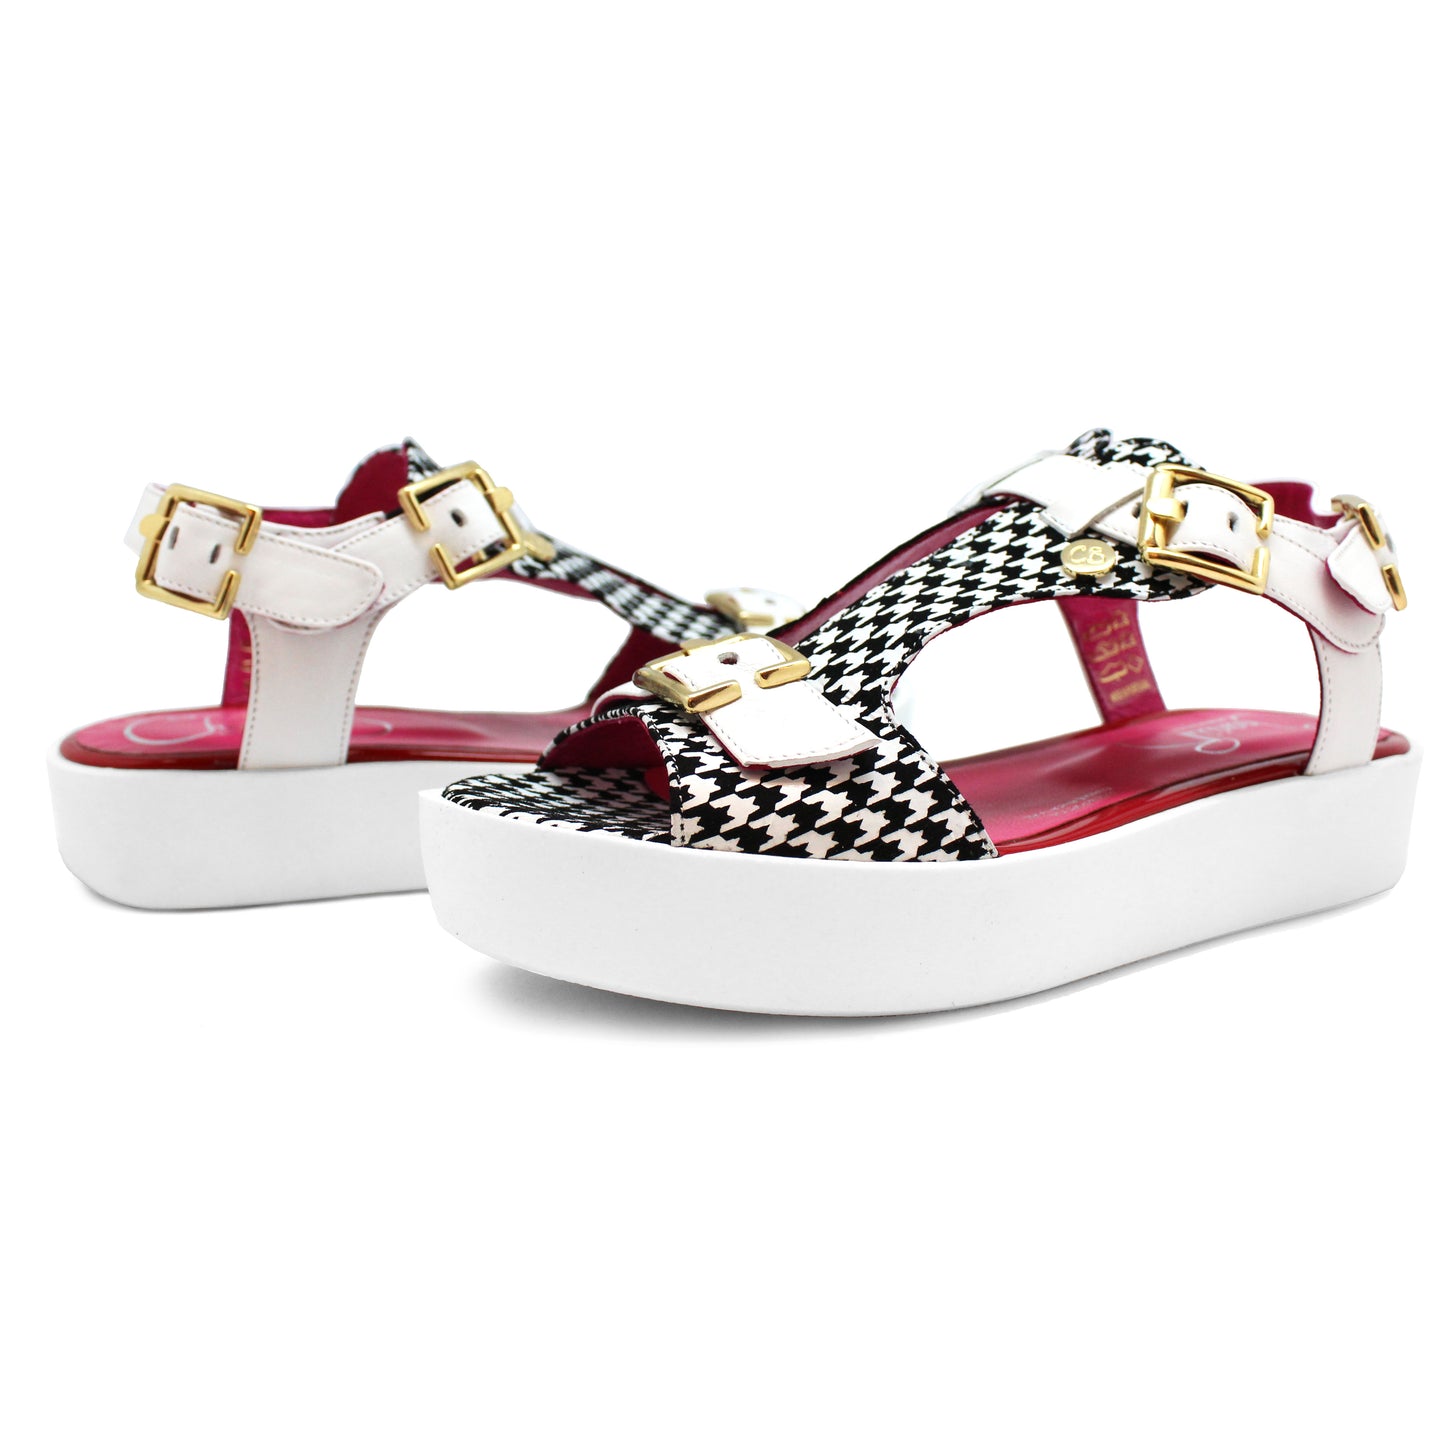 Mars - Houndstooth- Only 37 -41 & 42 Left!